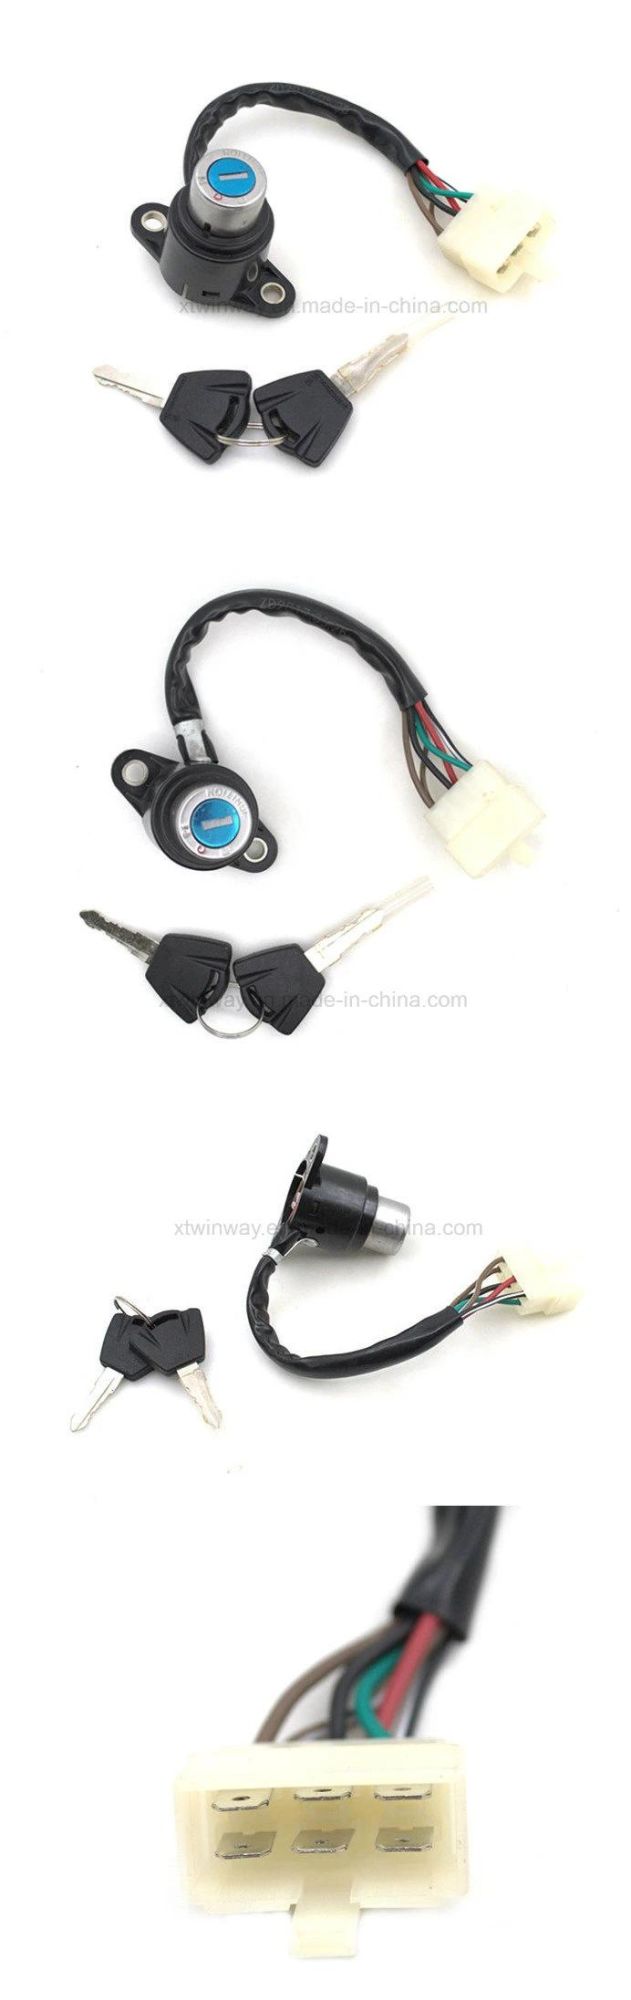 Cbt125 Motorcycle 6 Wire Ignition Starter Switch Lock Set Motorcycle Parts